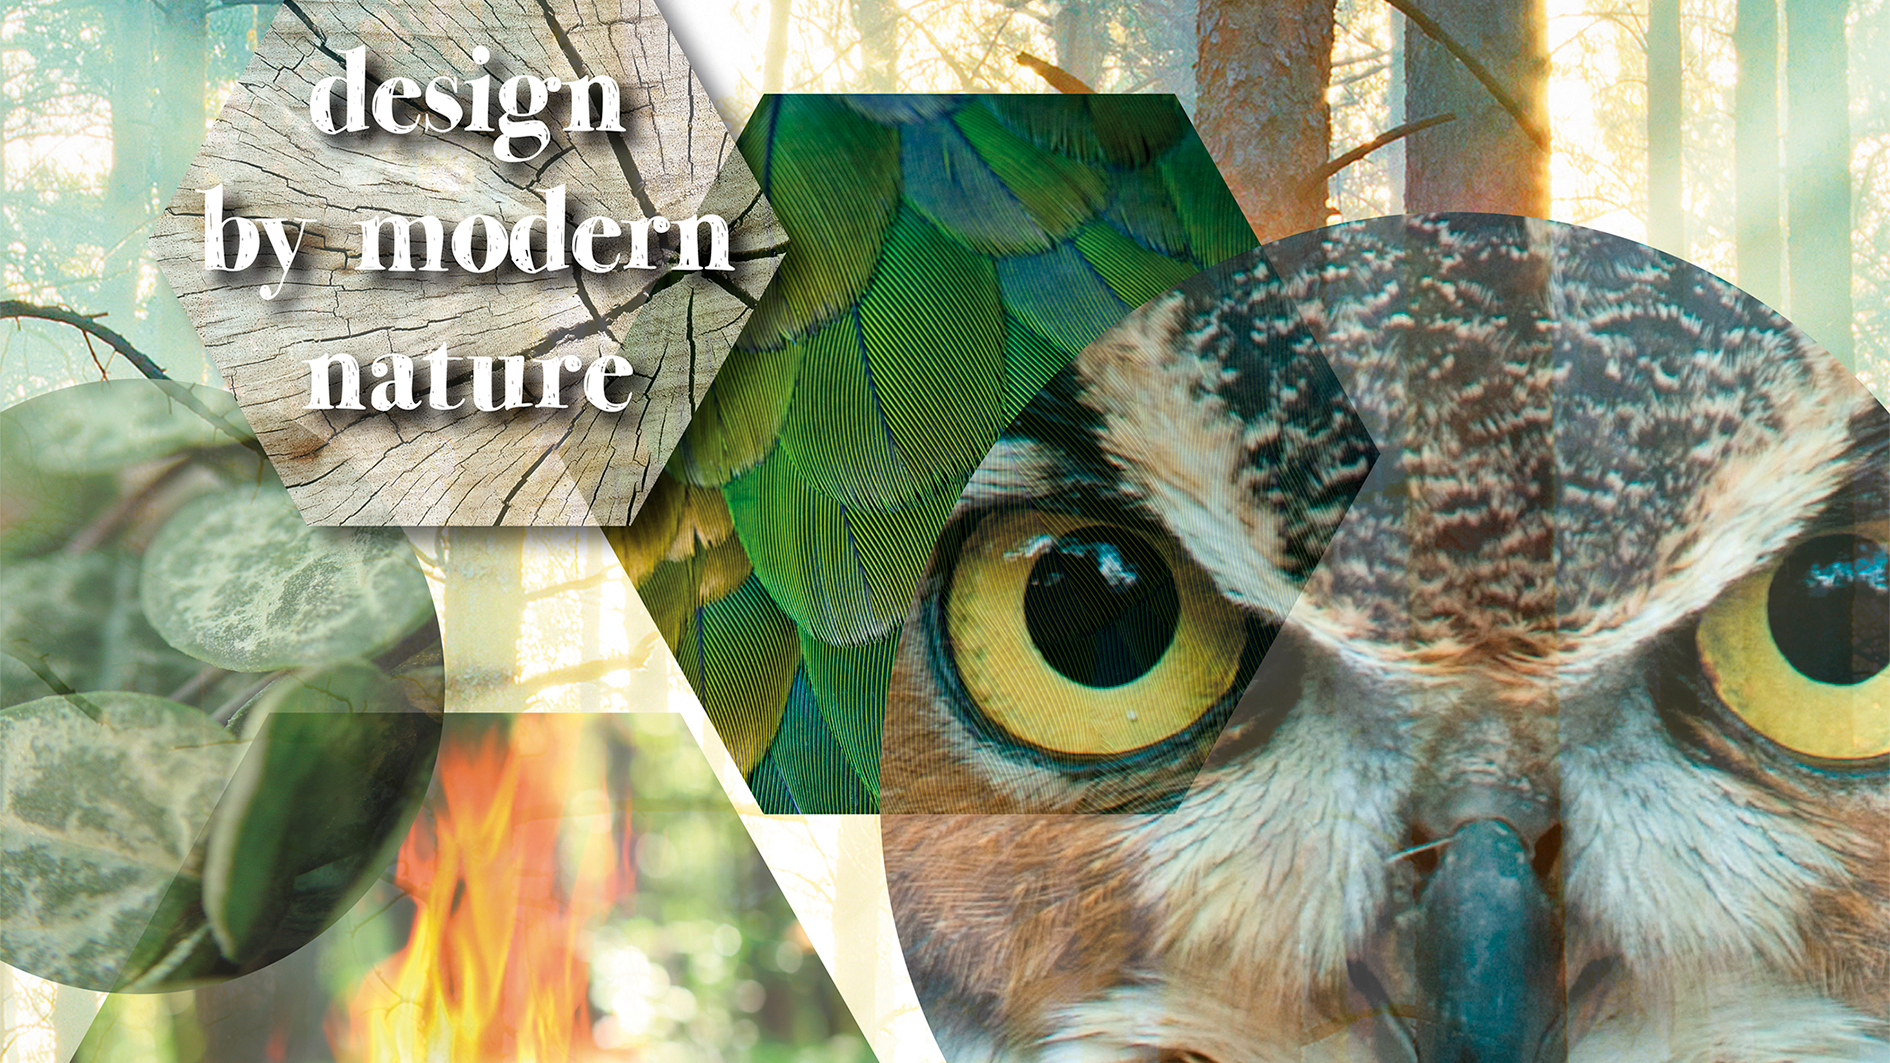 2016: "design by modern nature" by 2dezign